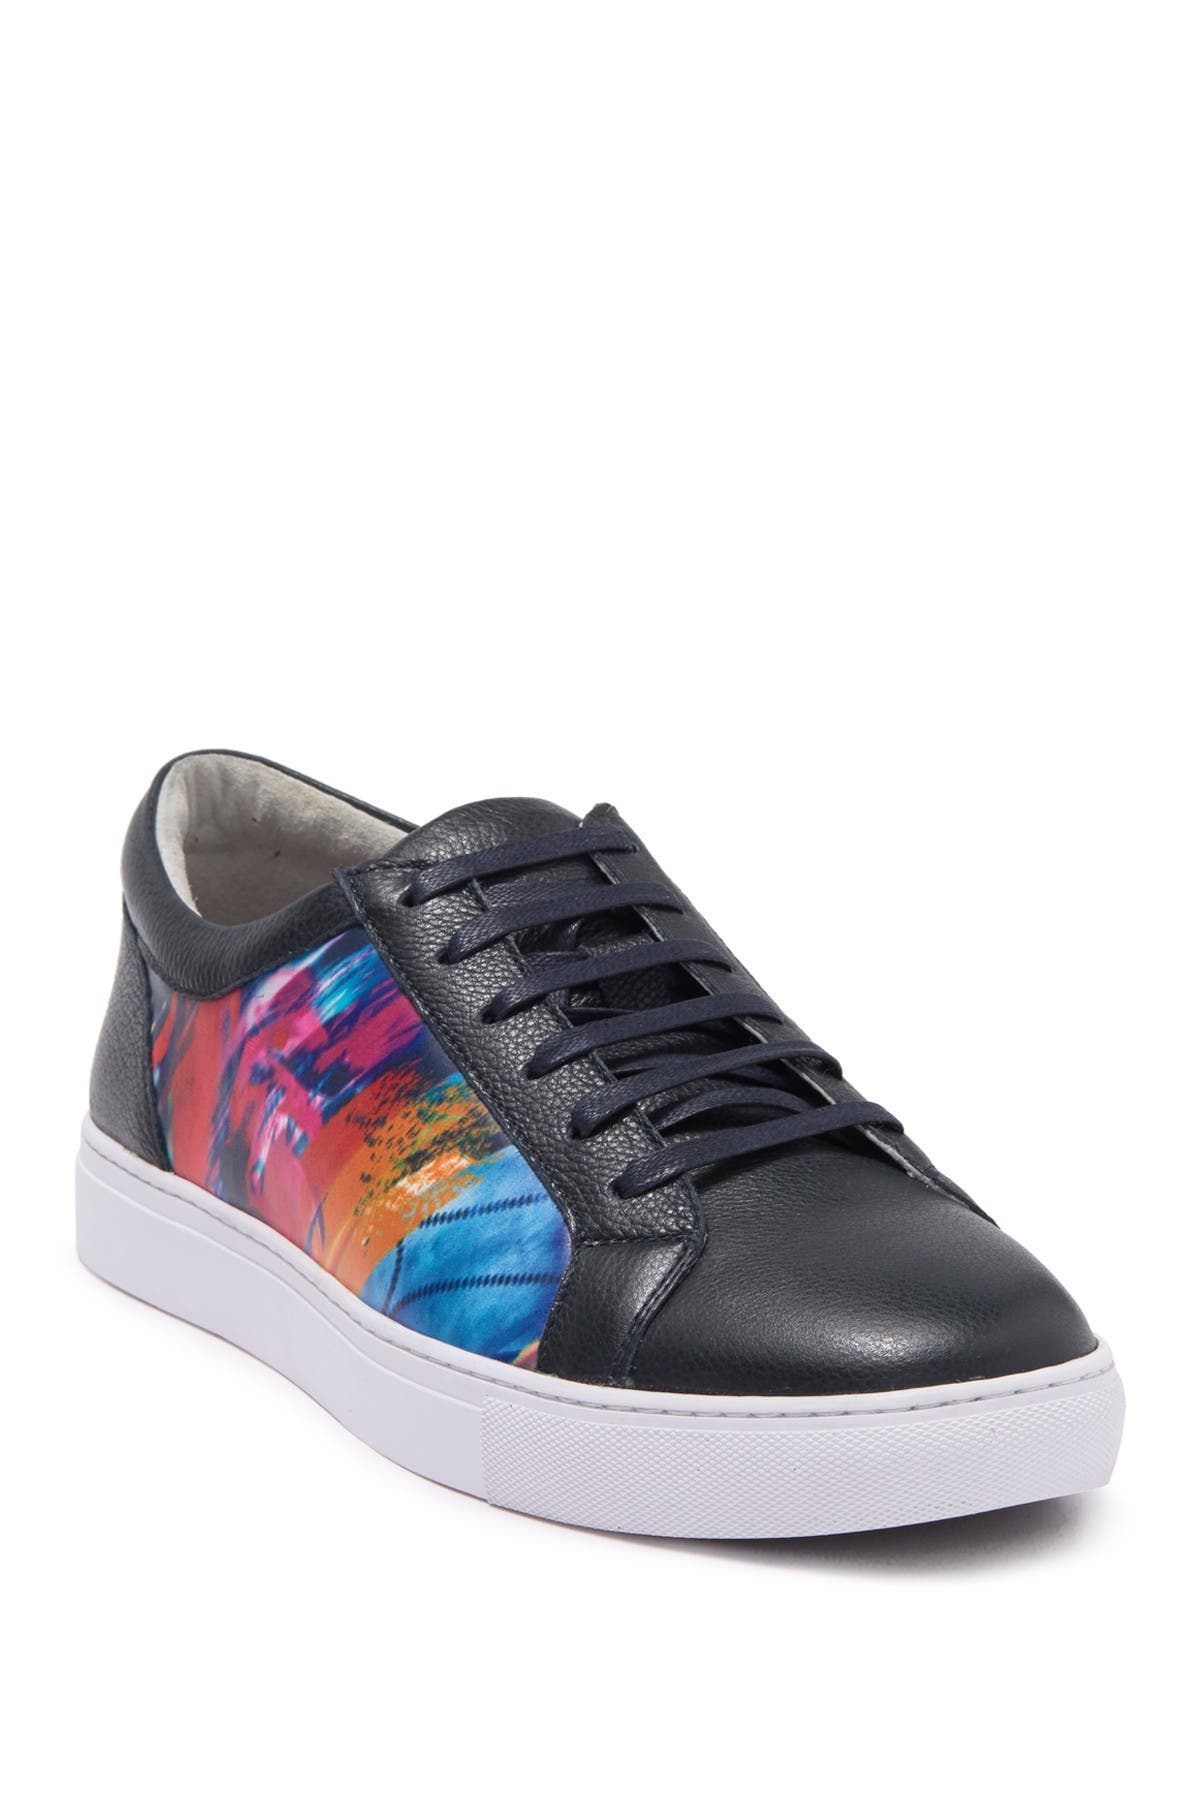 Robert Graham Finish Line Rainbow Lace-up Sneaker In Navy